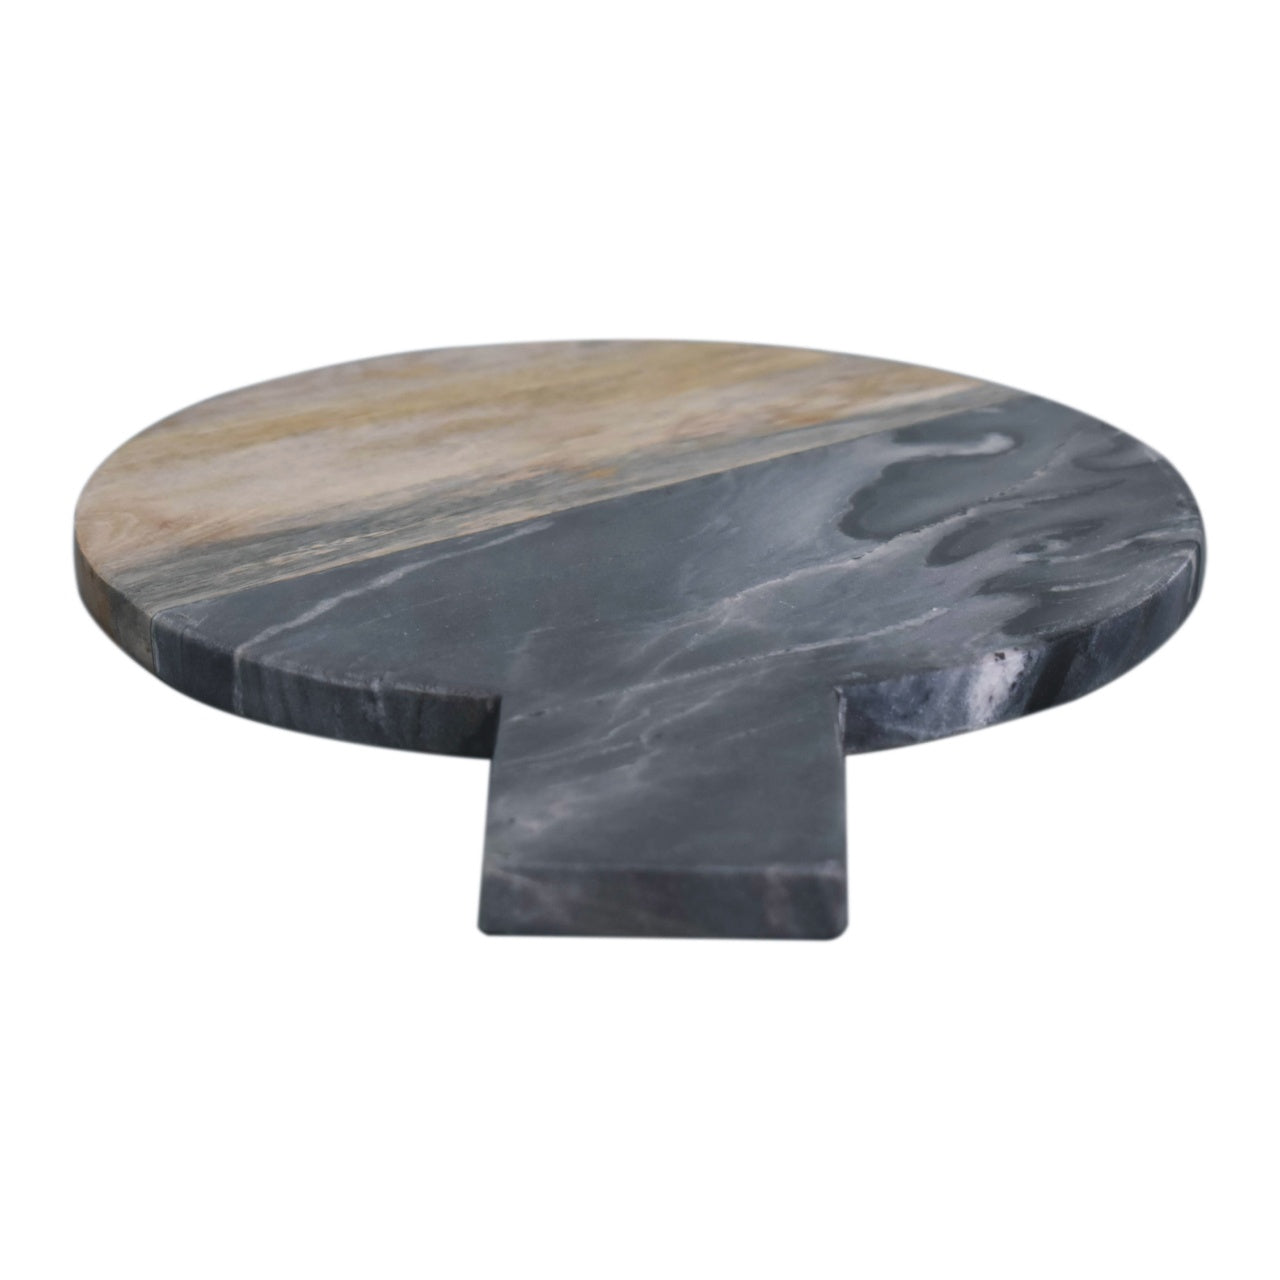 Black Marble, Terrazzo & Mango Wood Round Chopping Board - Red Ross Retail-Furniture Specialists 